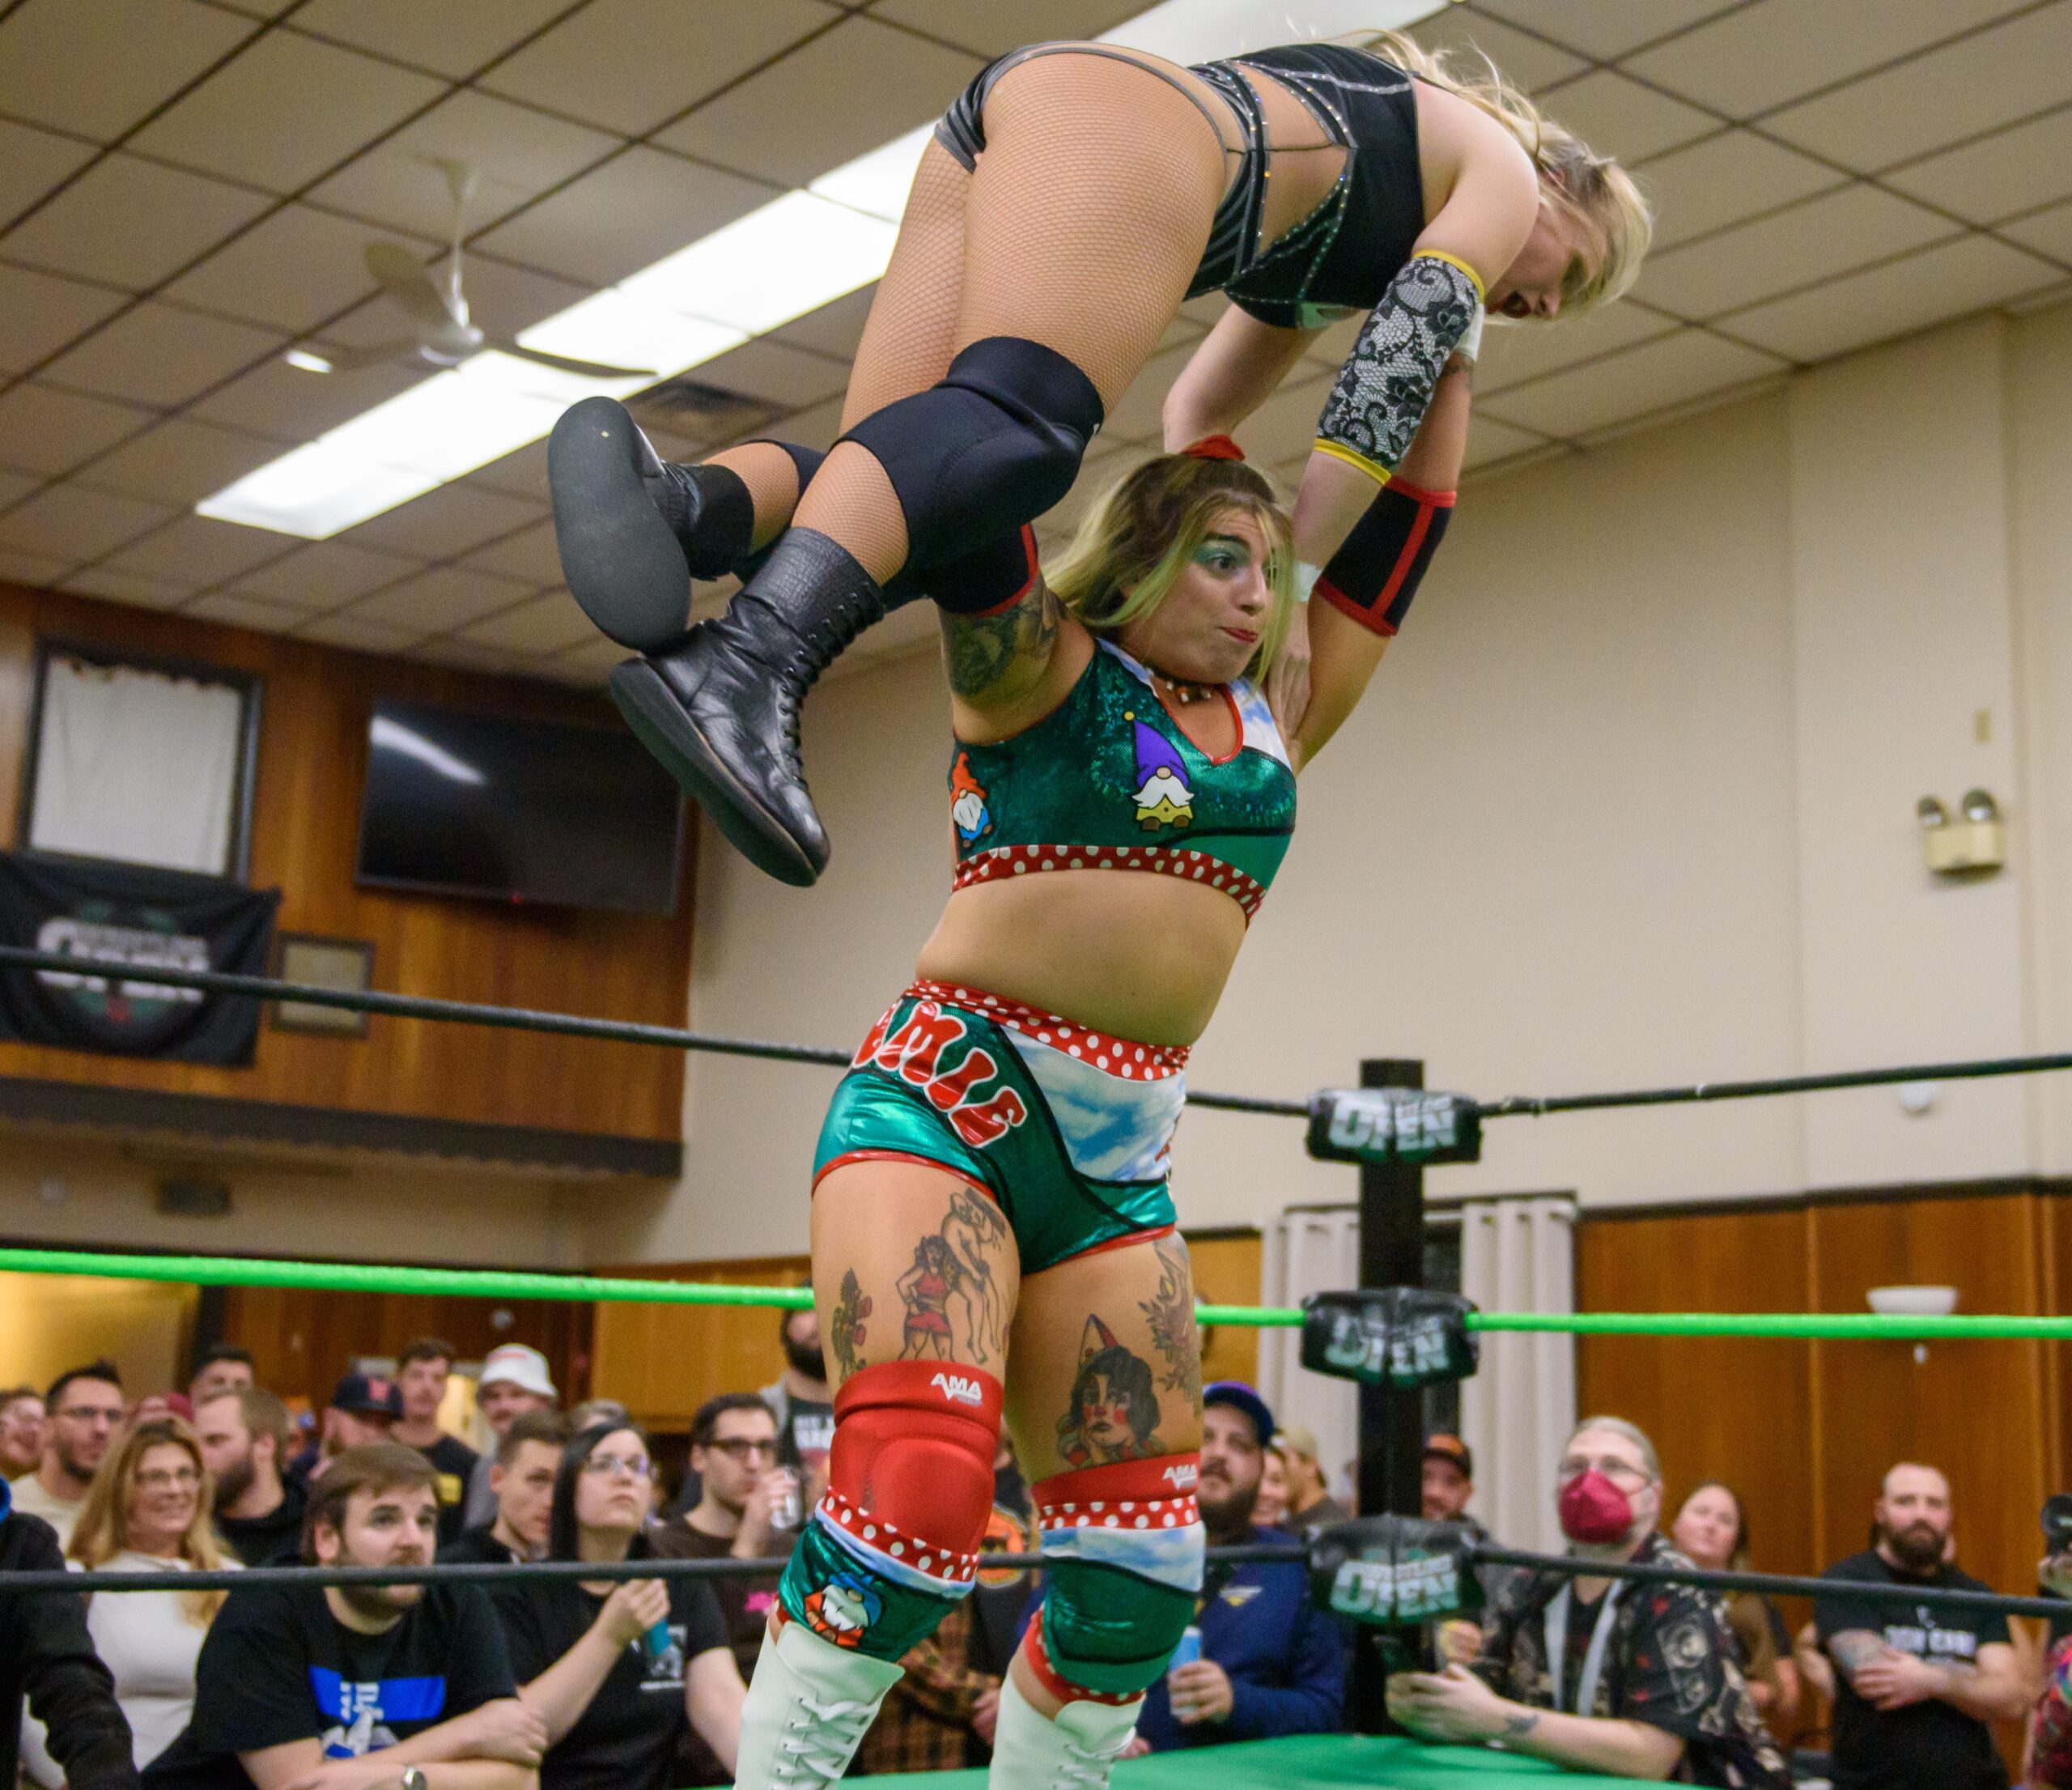 Santino Bros. Wrestling's October 12th, 2018 event Review